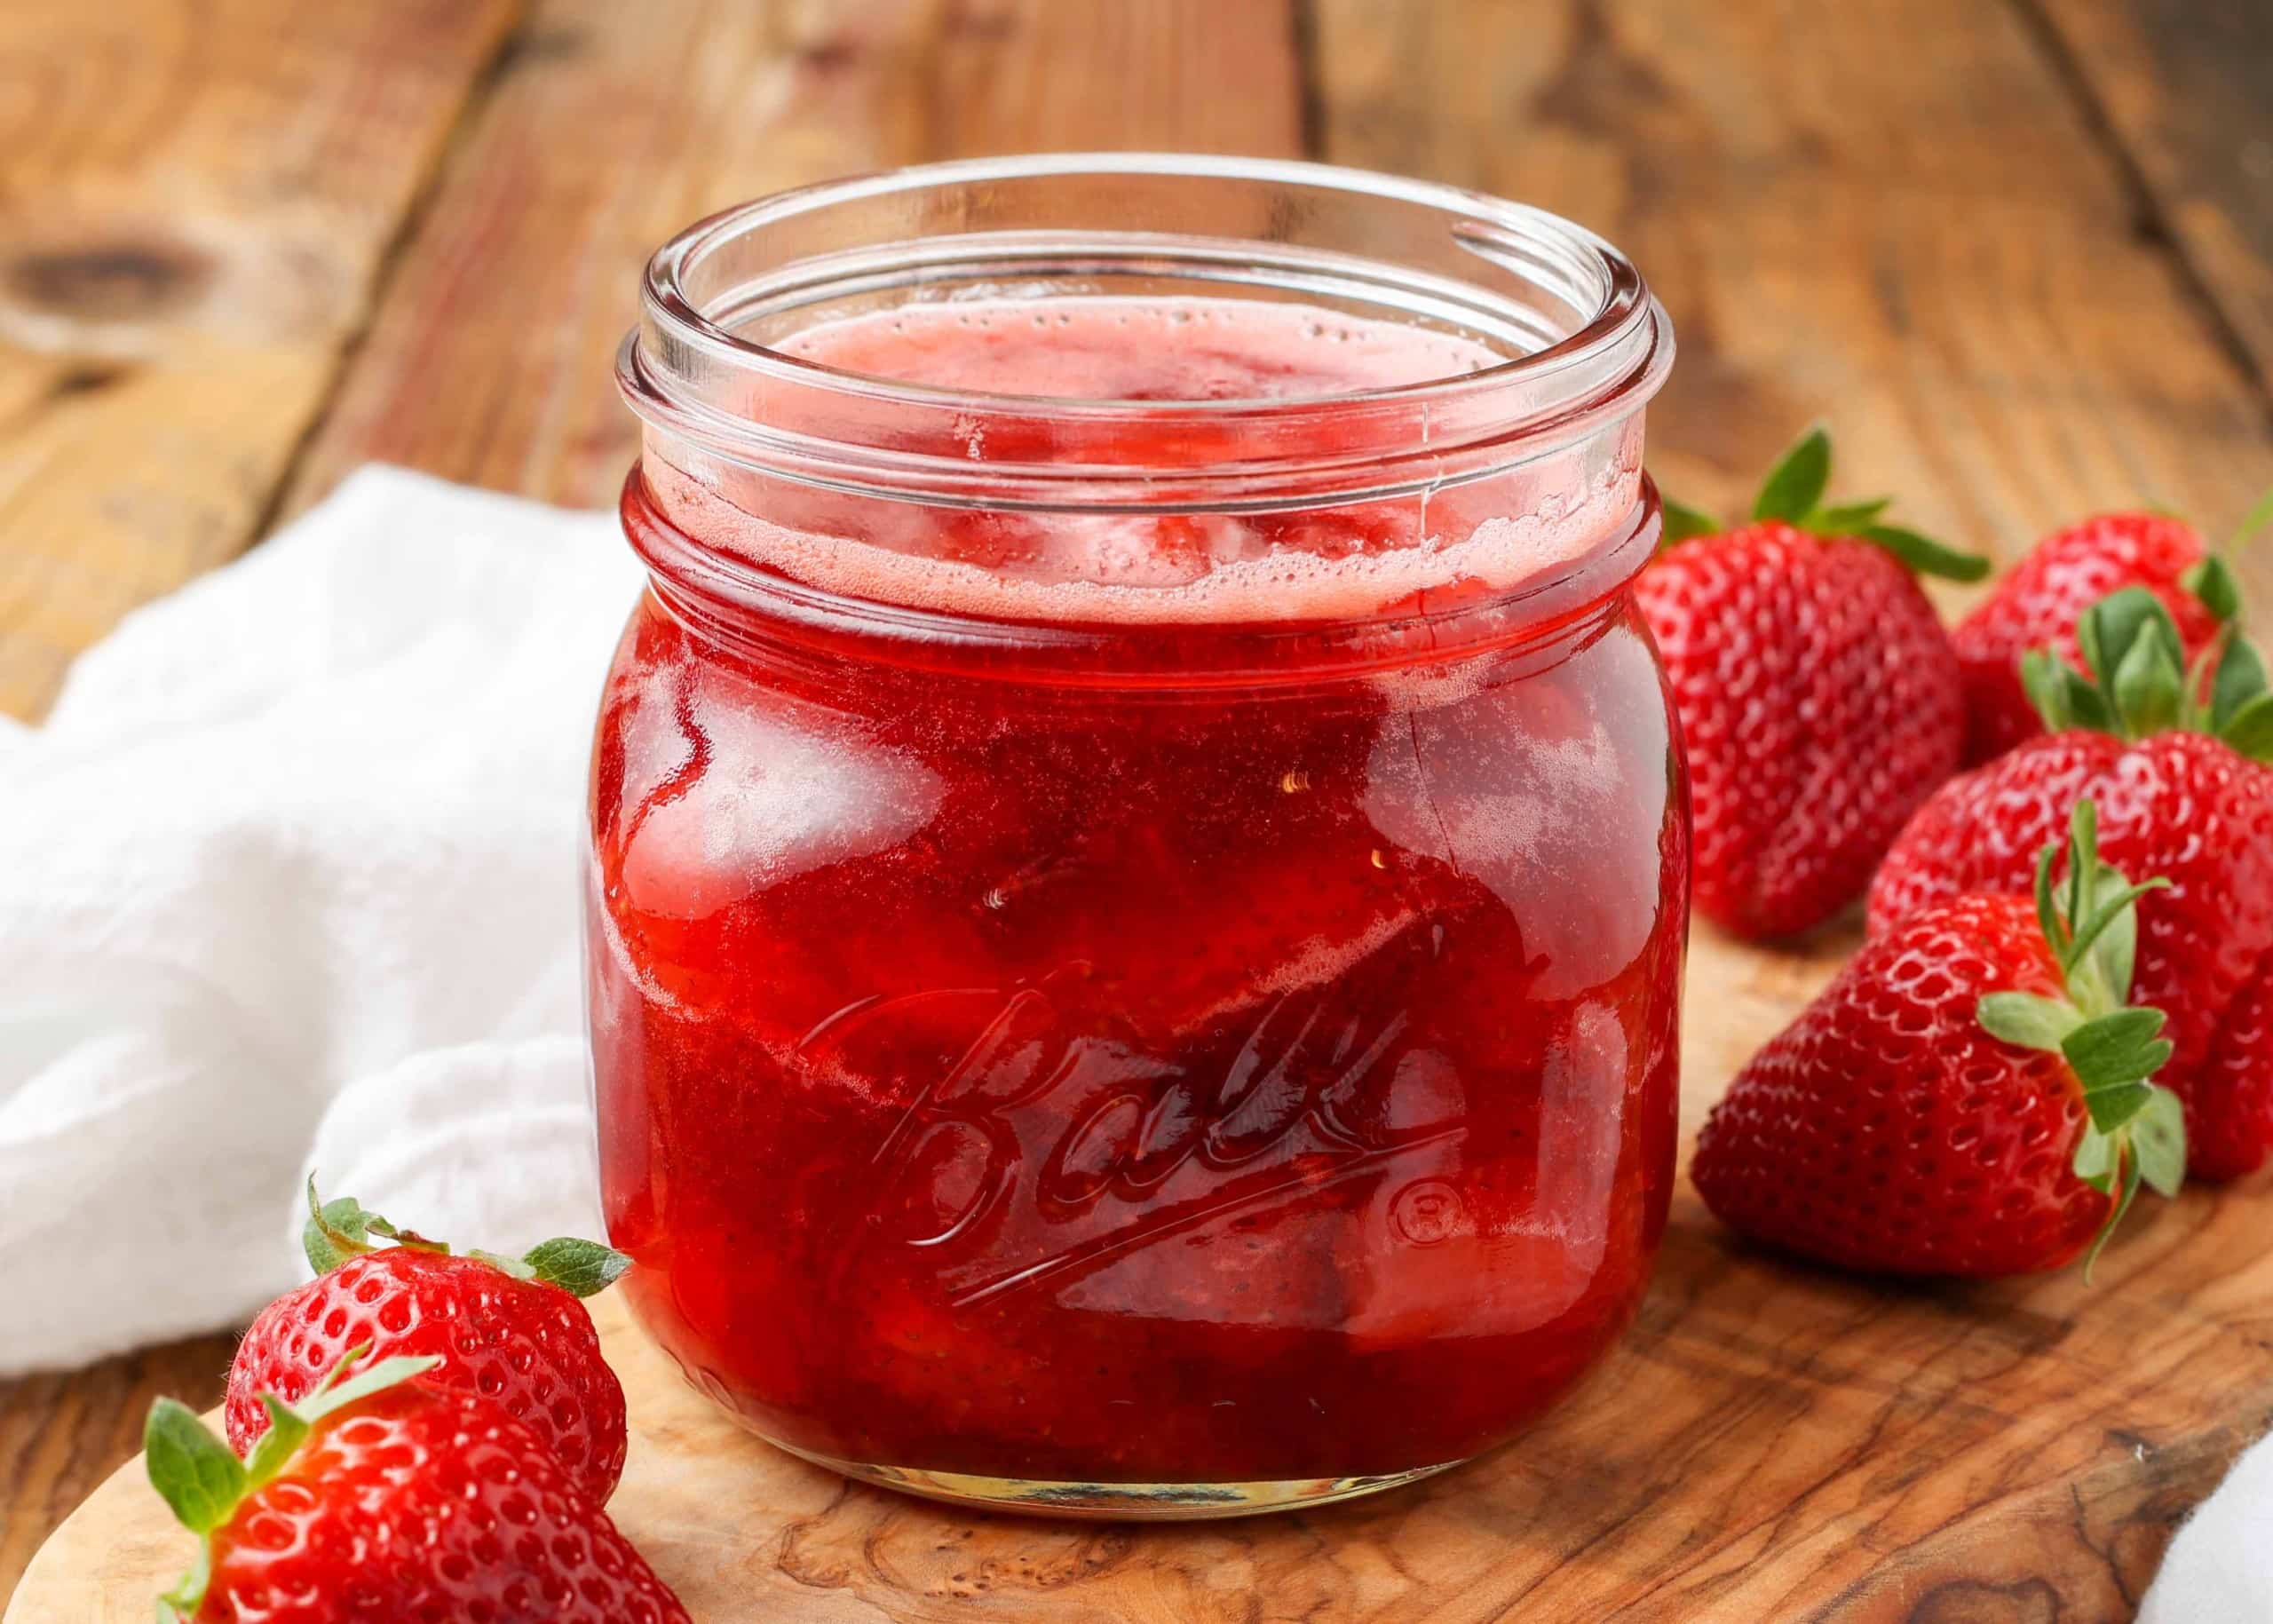 Easy Strawberry Compote - How To Make Strawberry Compote